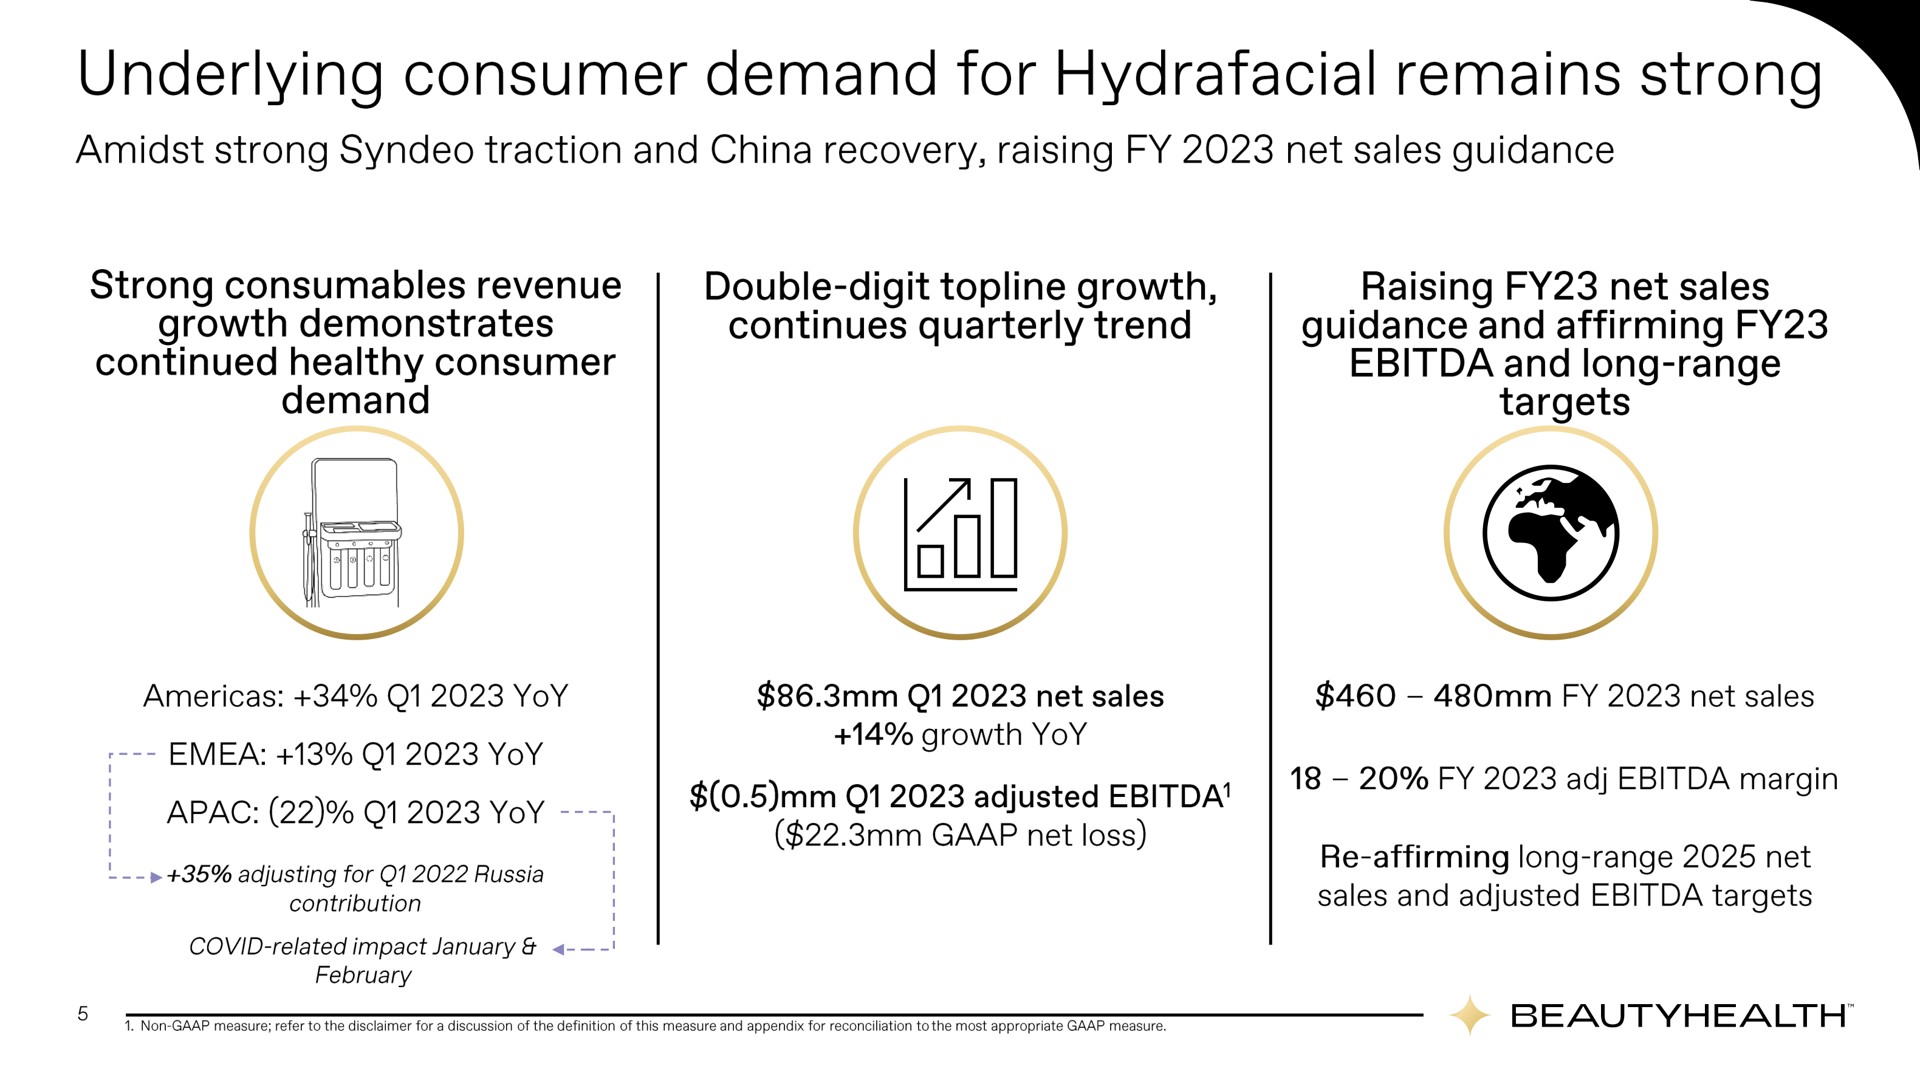 underlying consumer demand for remains strong | Hydrafacial